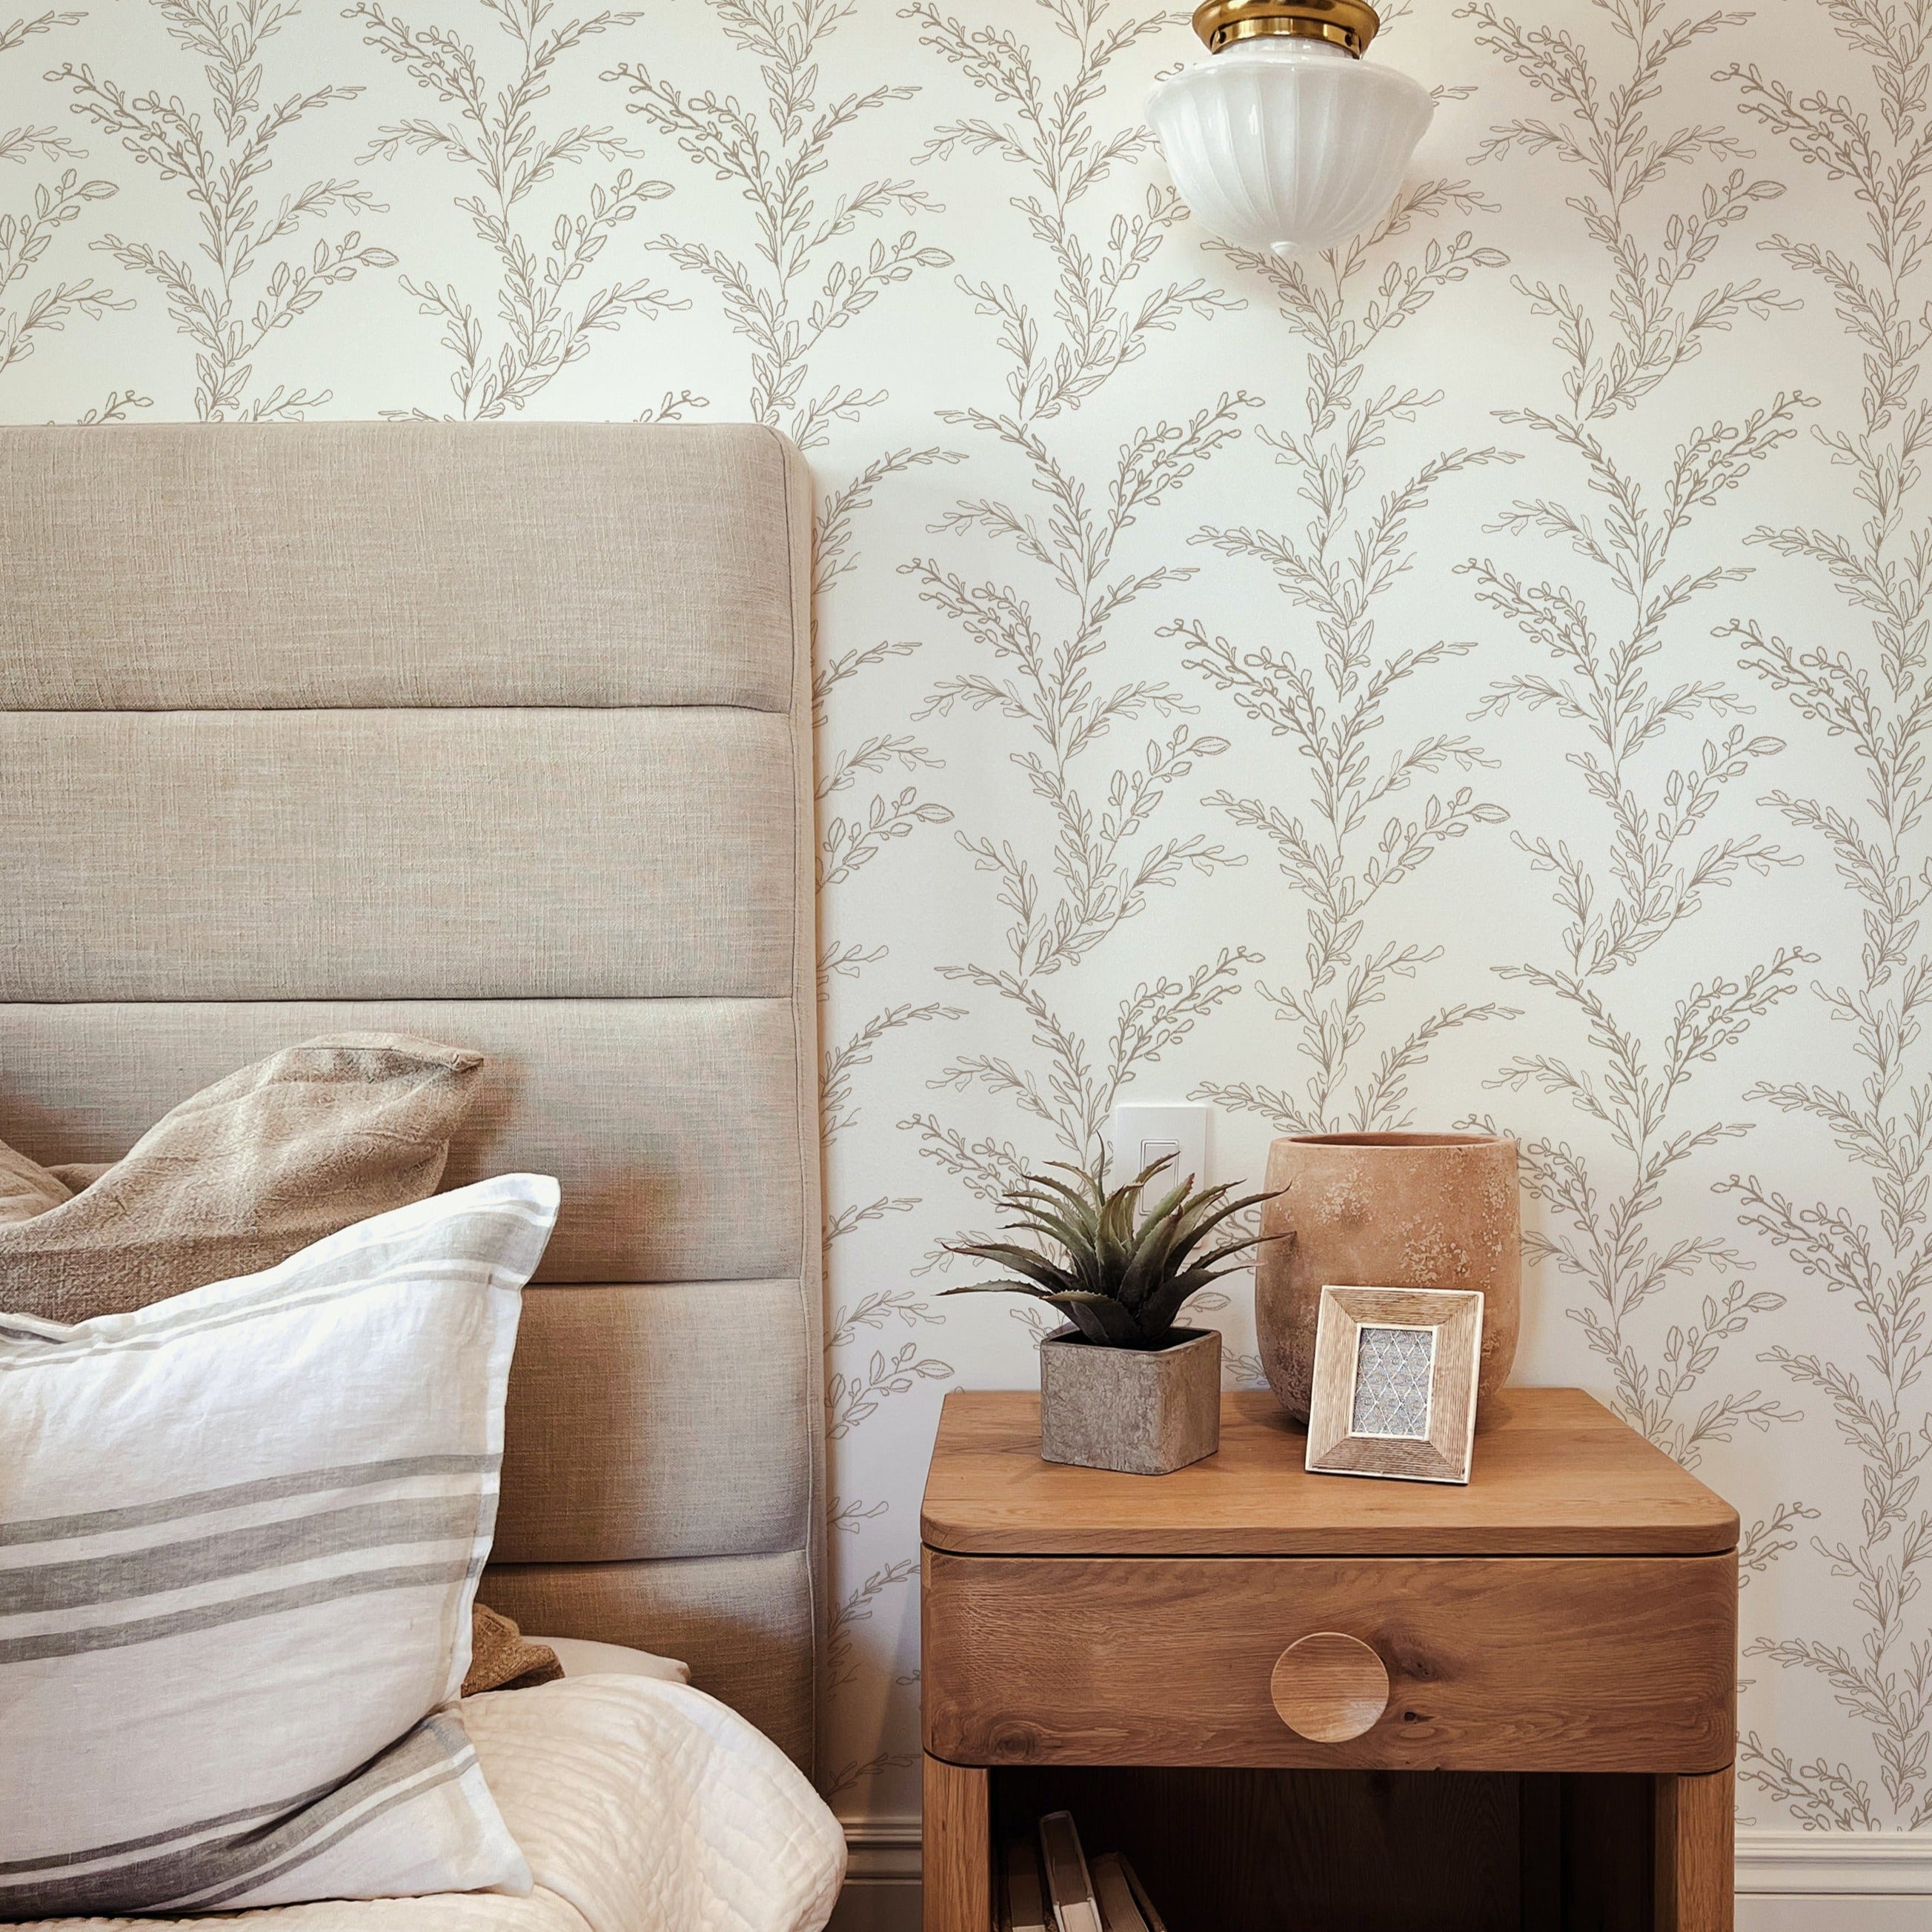 Barn Wood Wallpaper Removable Peel and Stick Wall paper